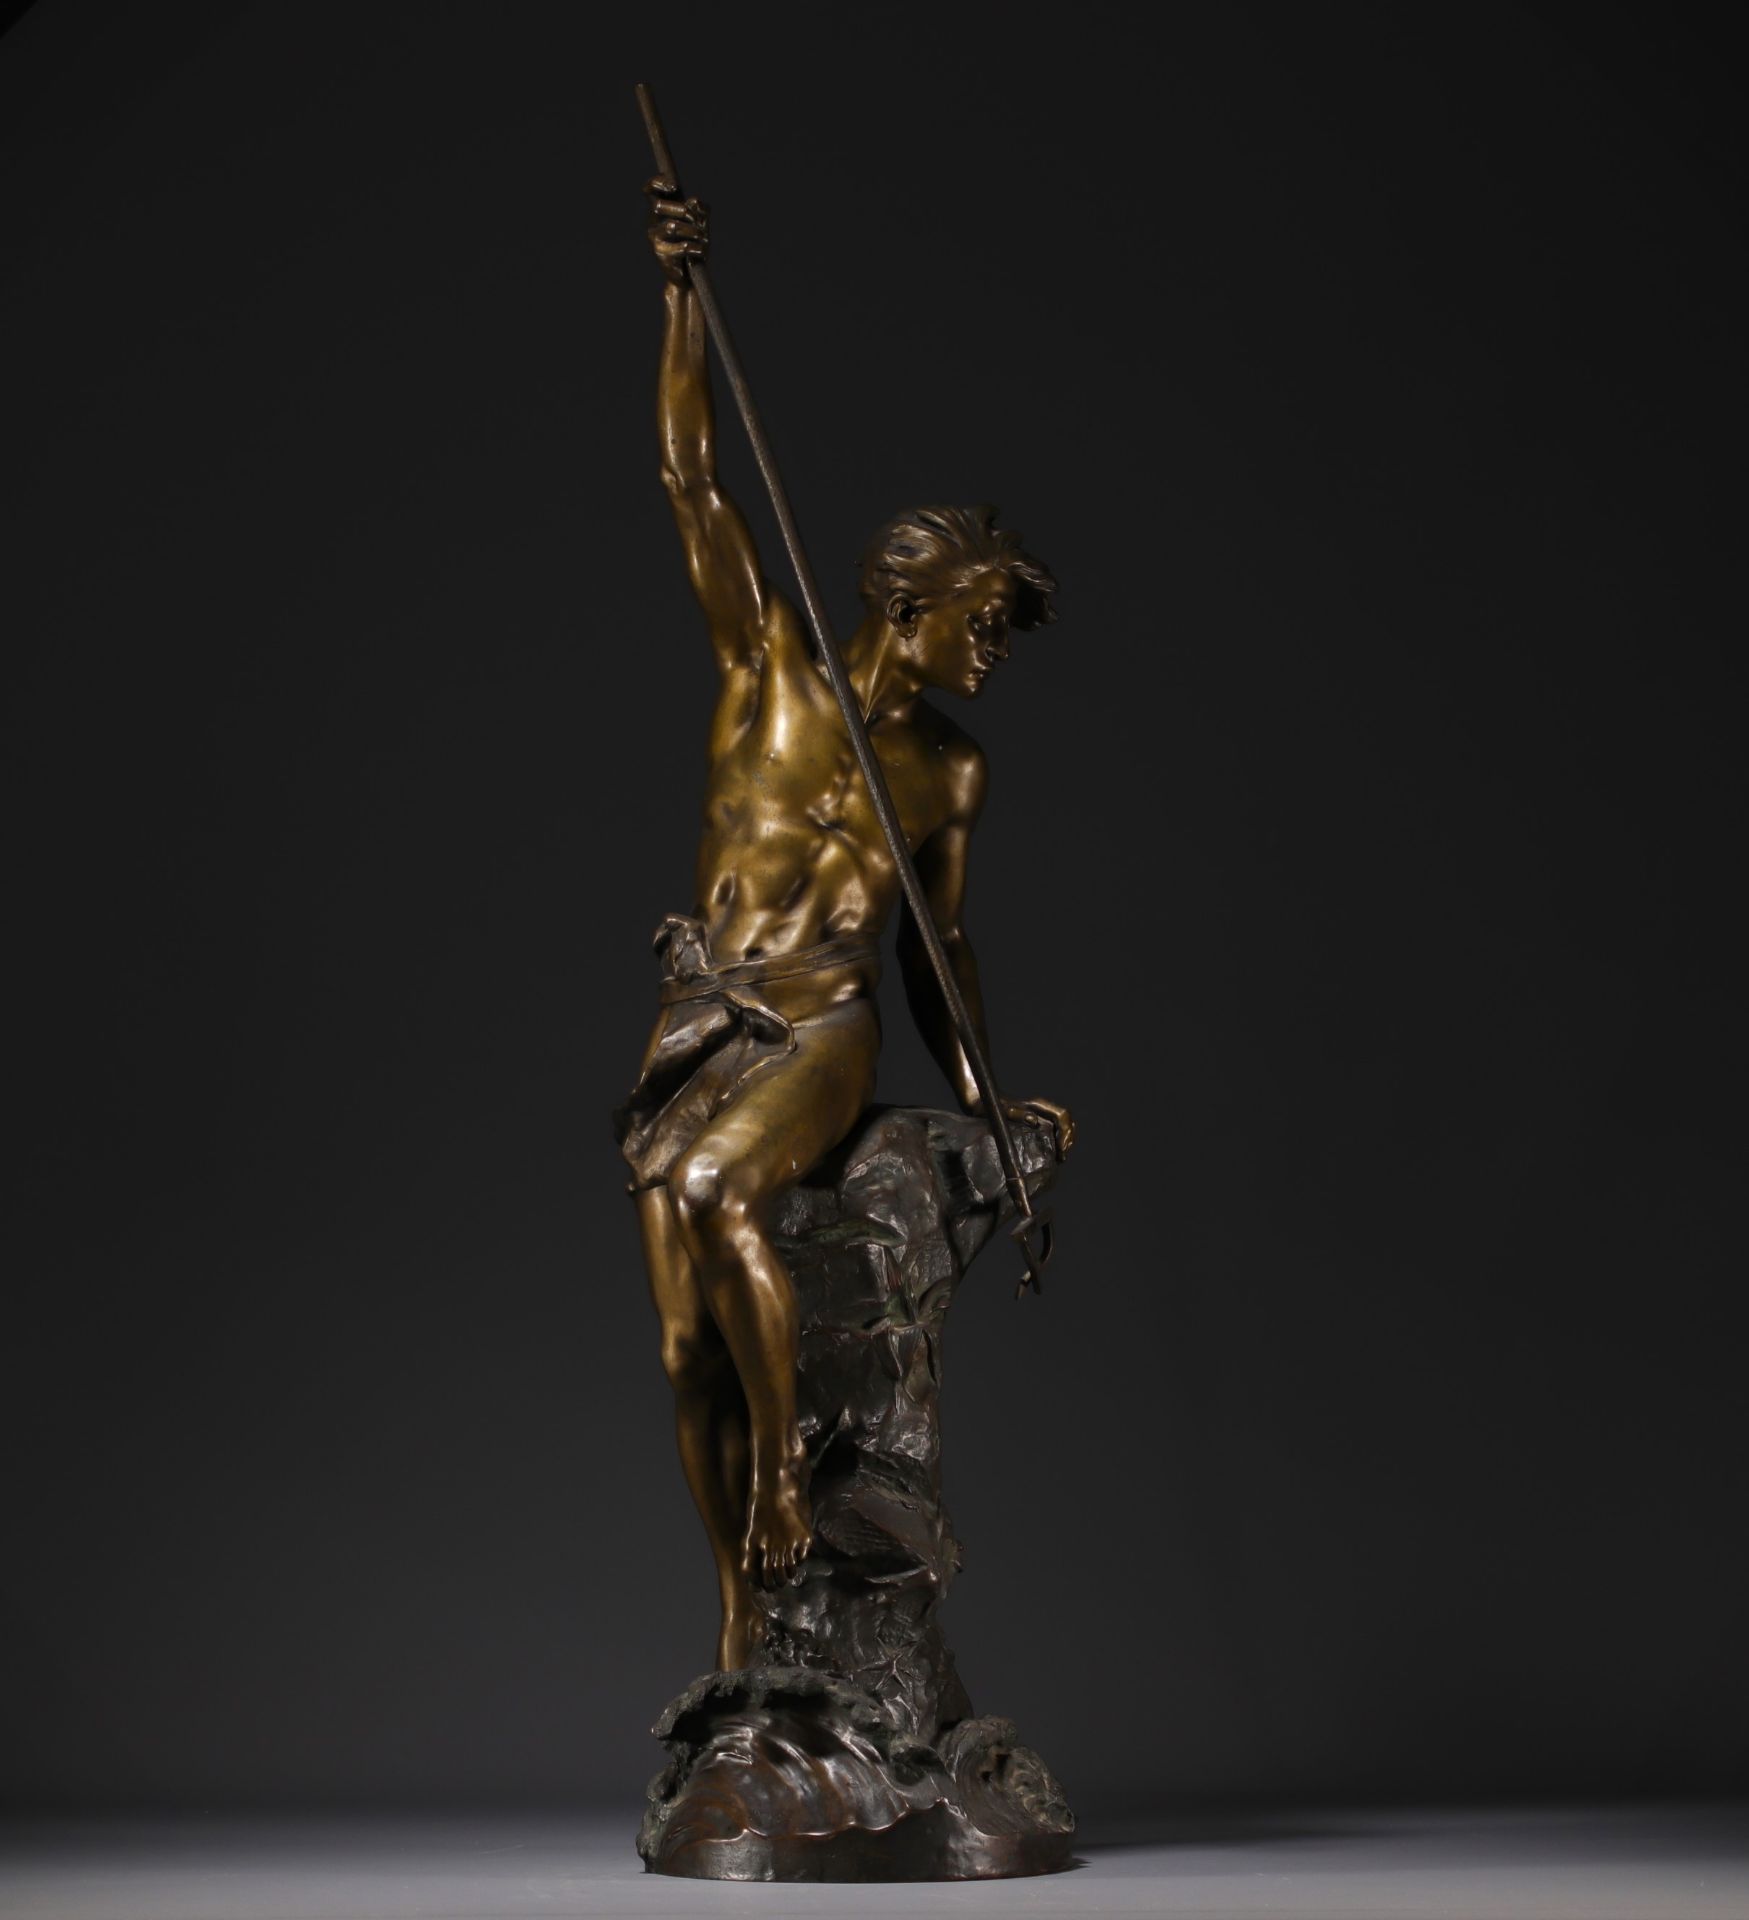 Ernest Justin FERRAND (1846-1932) "The young sinner" Sculpture in chased and patinated bronze. - Image 2 of 7